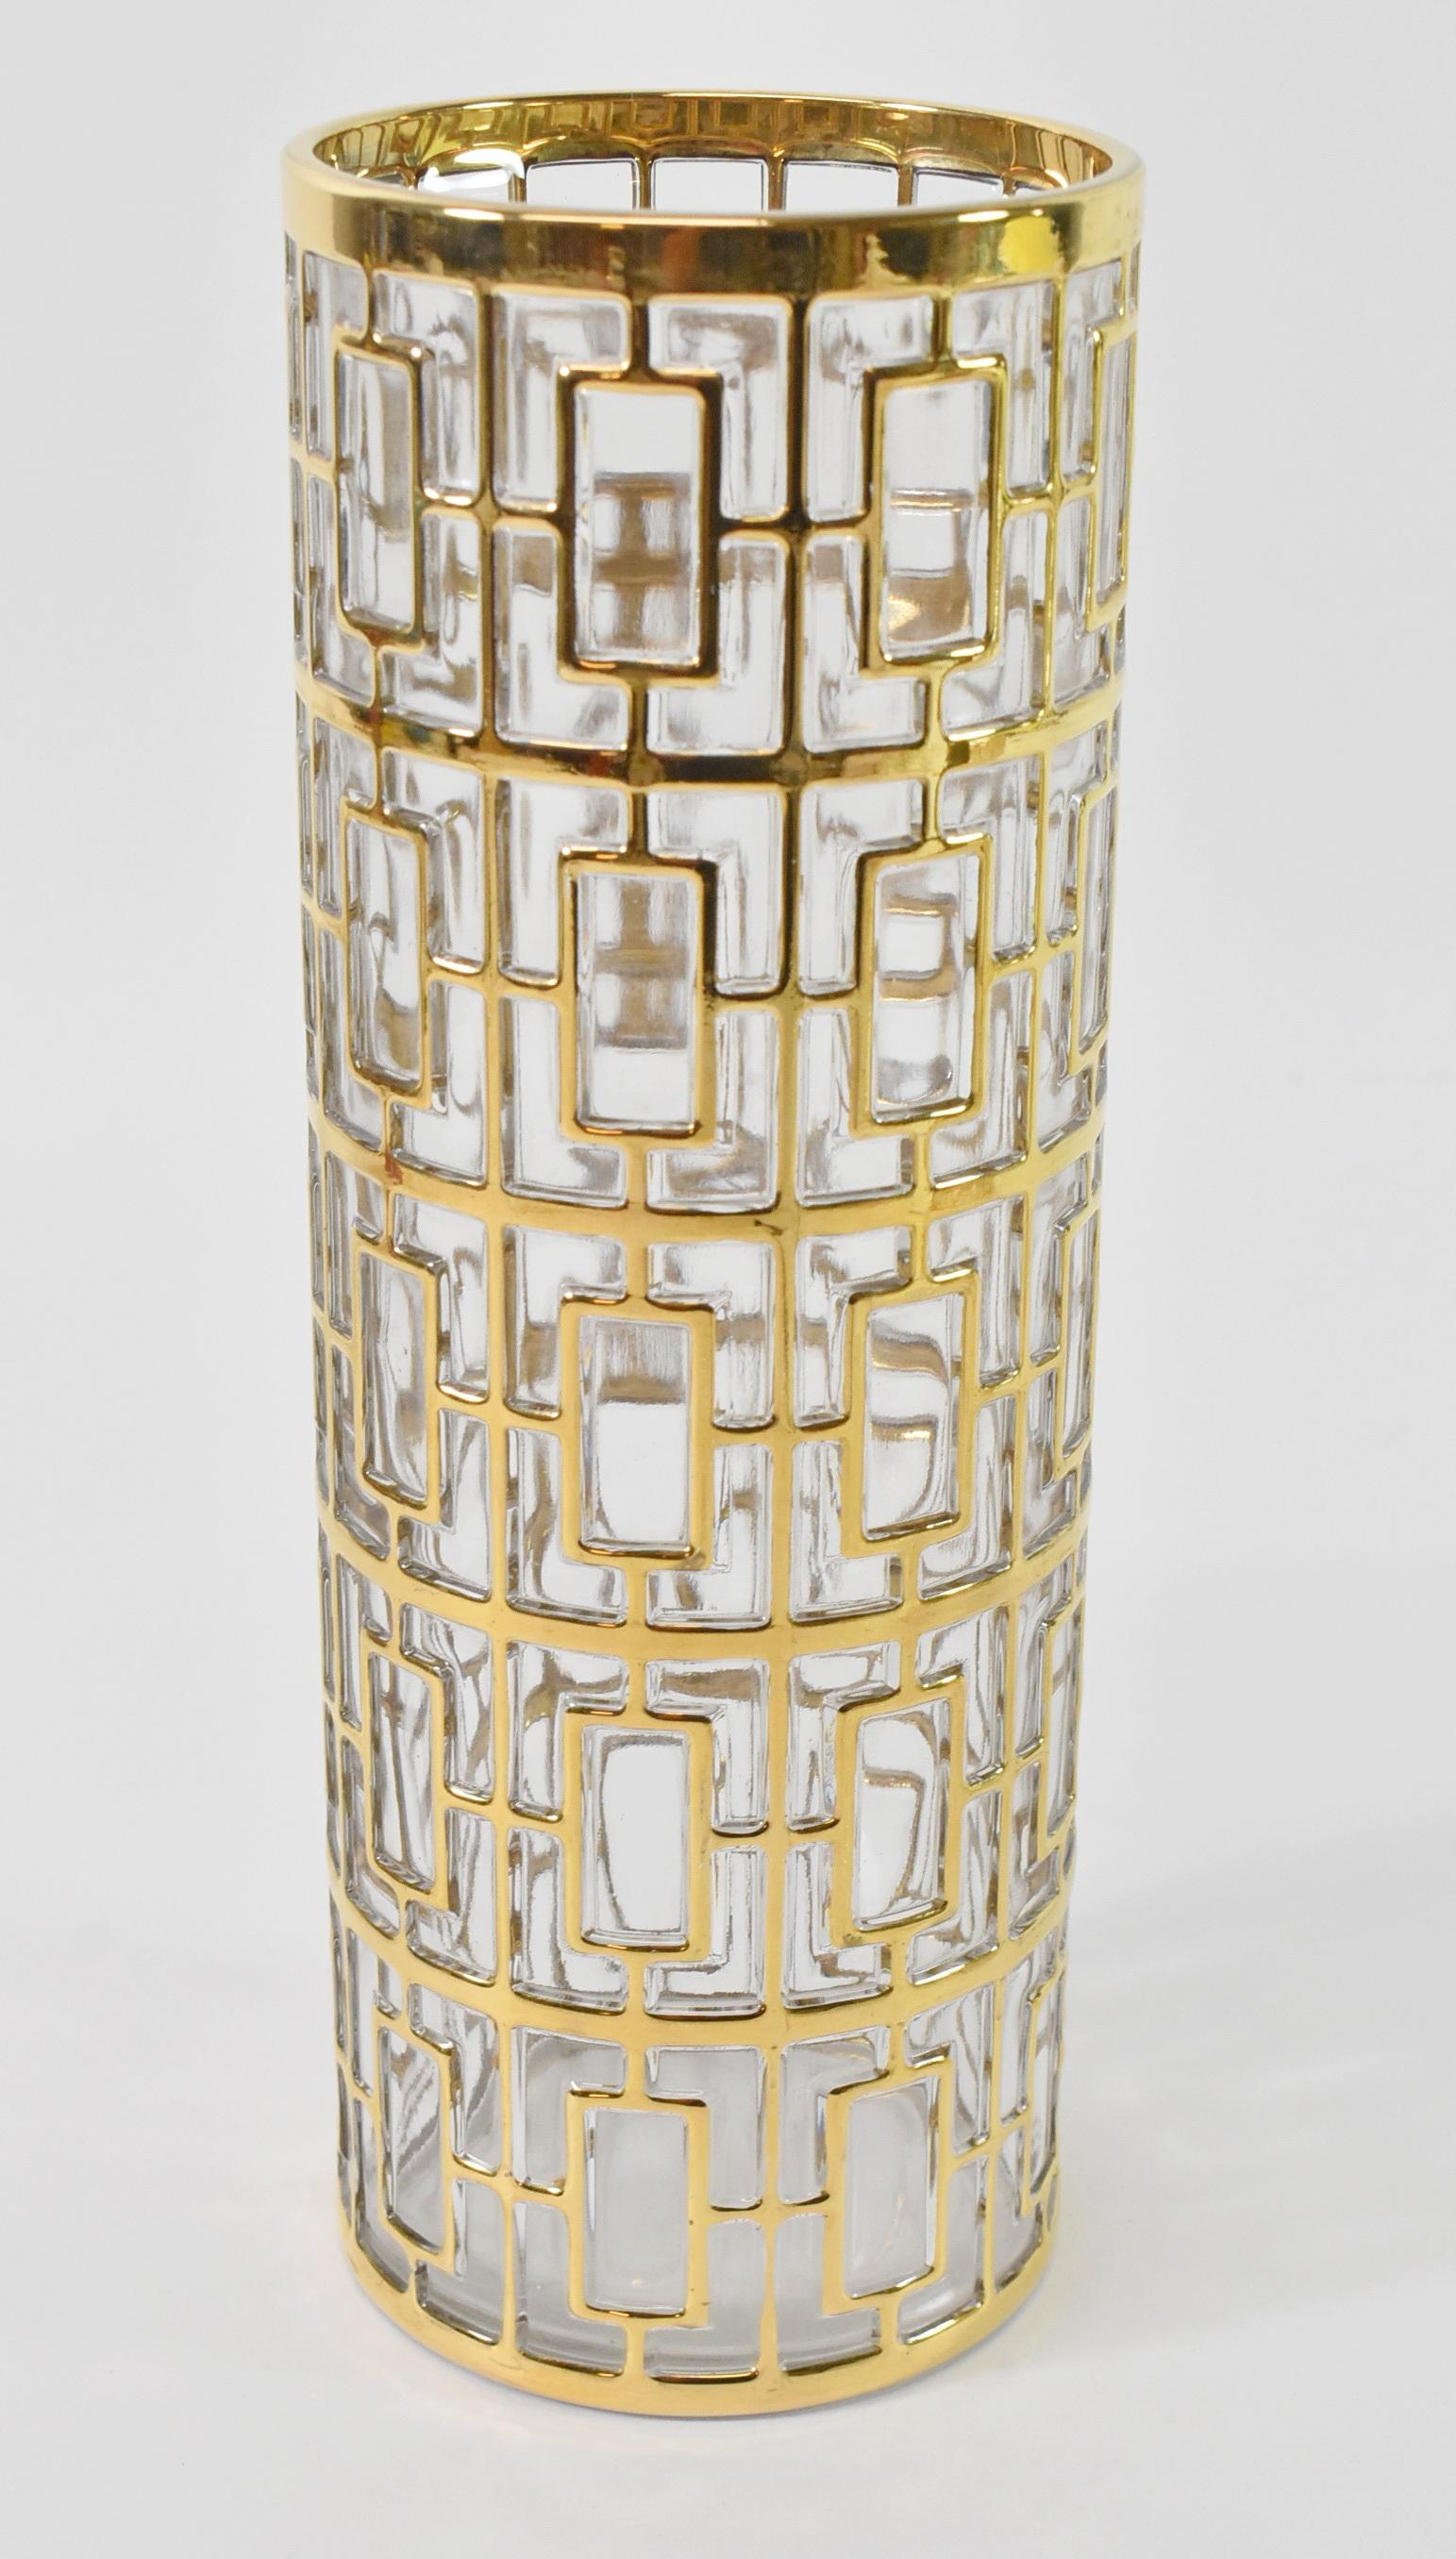 22K gold overlay imperial glass shoji glass vase, cocktail mixer barware. Elegant vintage Imperial Glass mixer has the iconic and collected 22K gold overlay over glass called the Shoji or Greek Key. This piece is from the 60's and has the IG marking